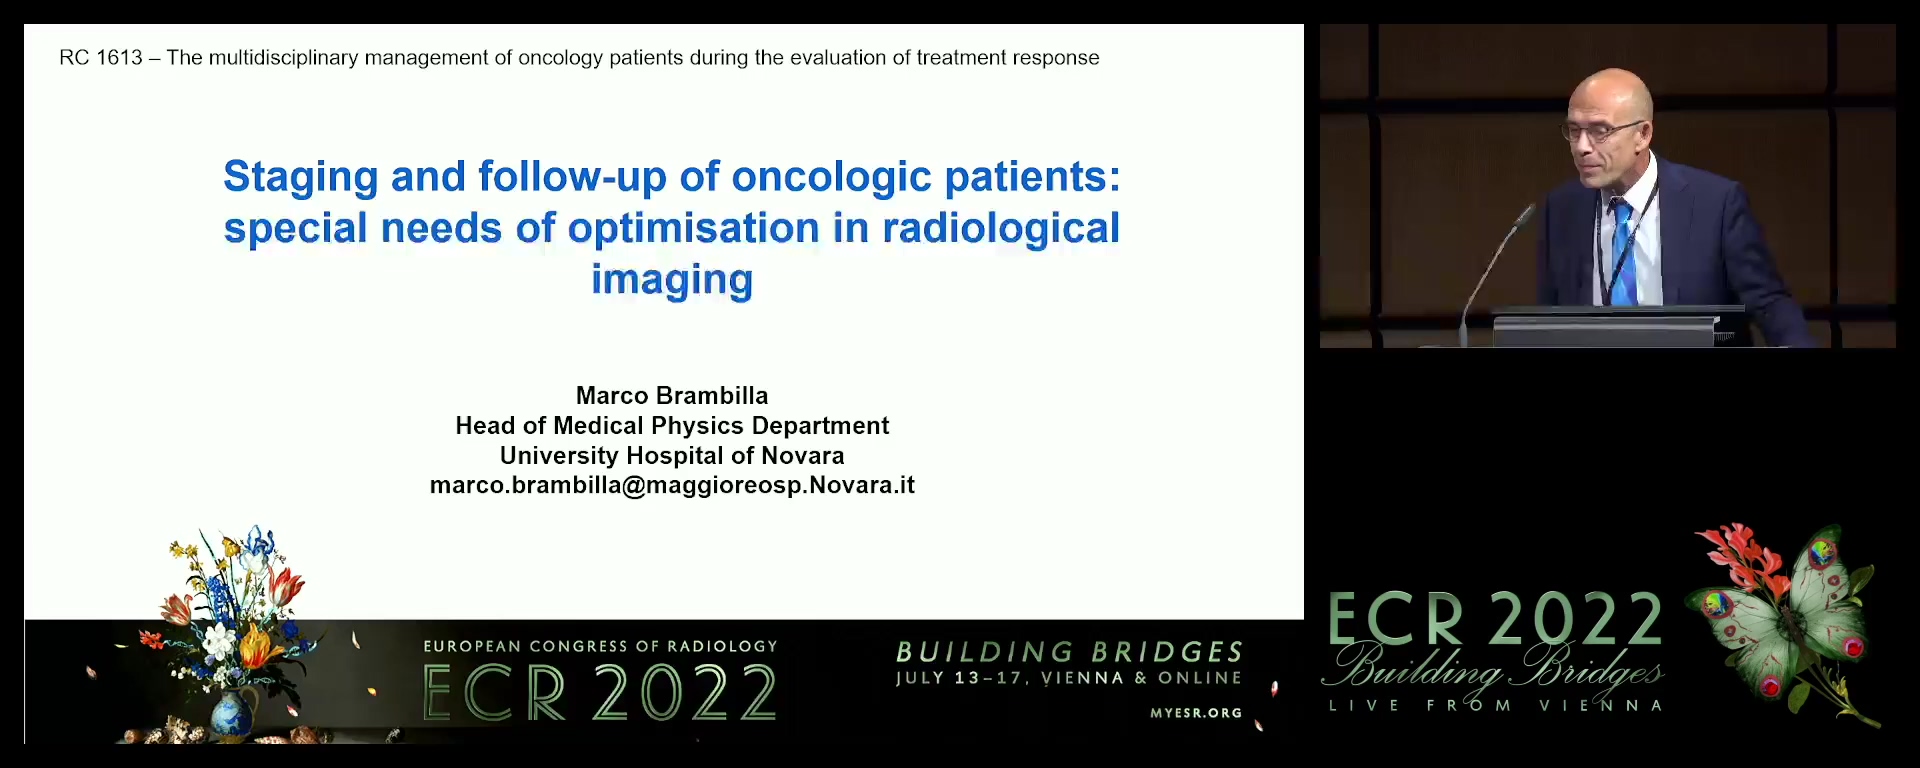 Staging and follow-up of oncologic patients: special needs of optimisation in radiological imaging